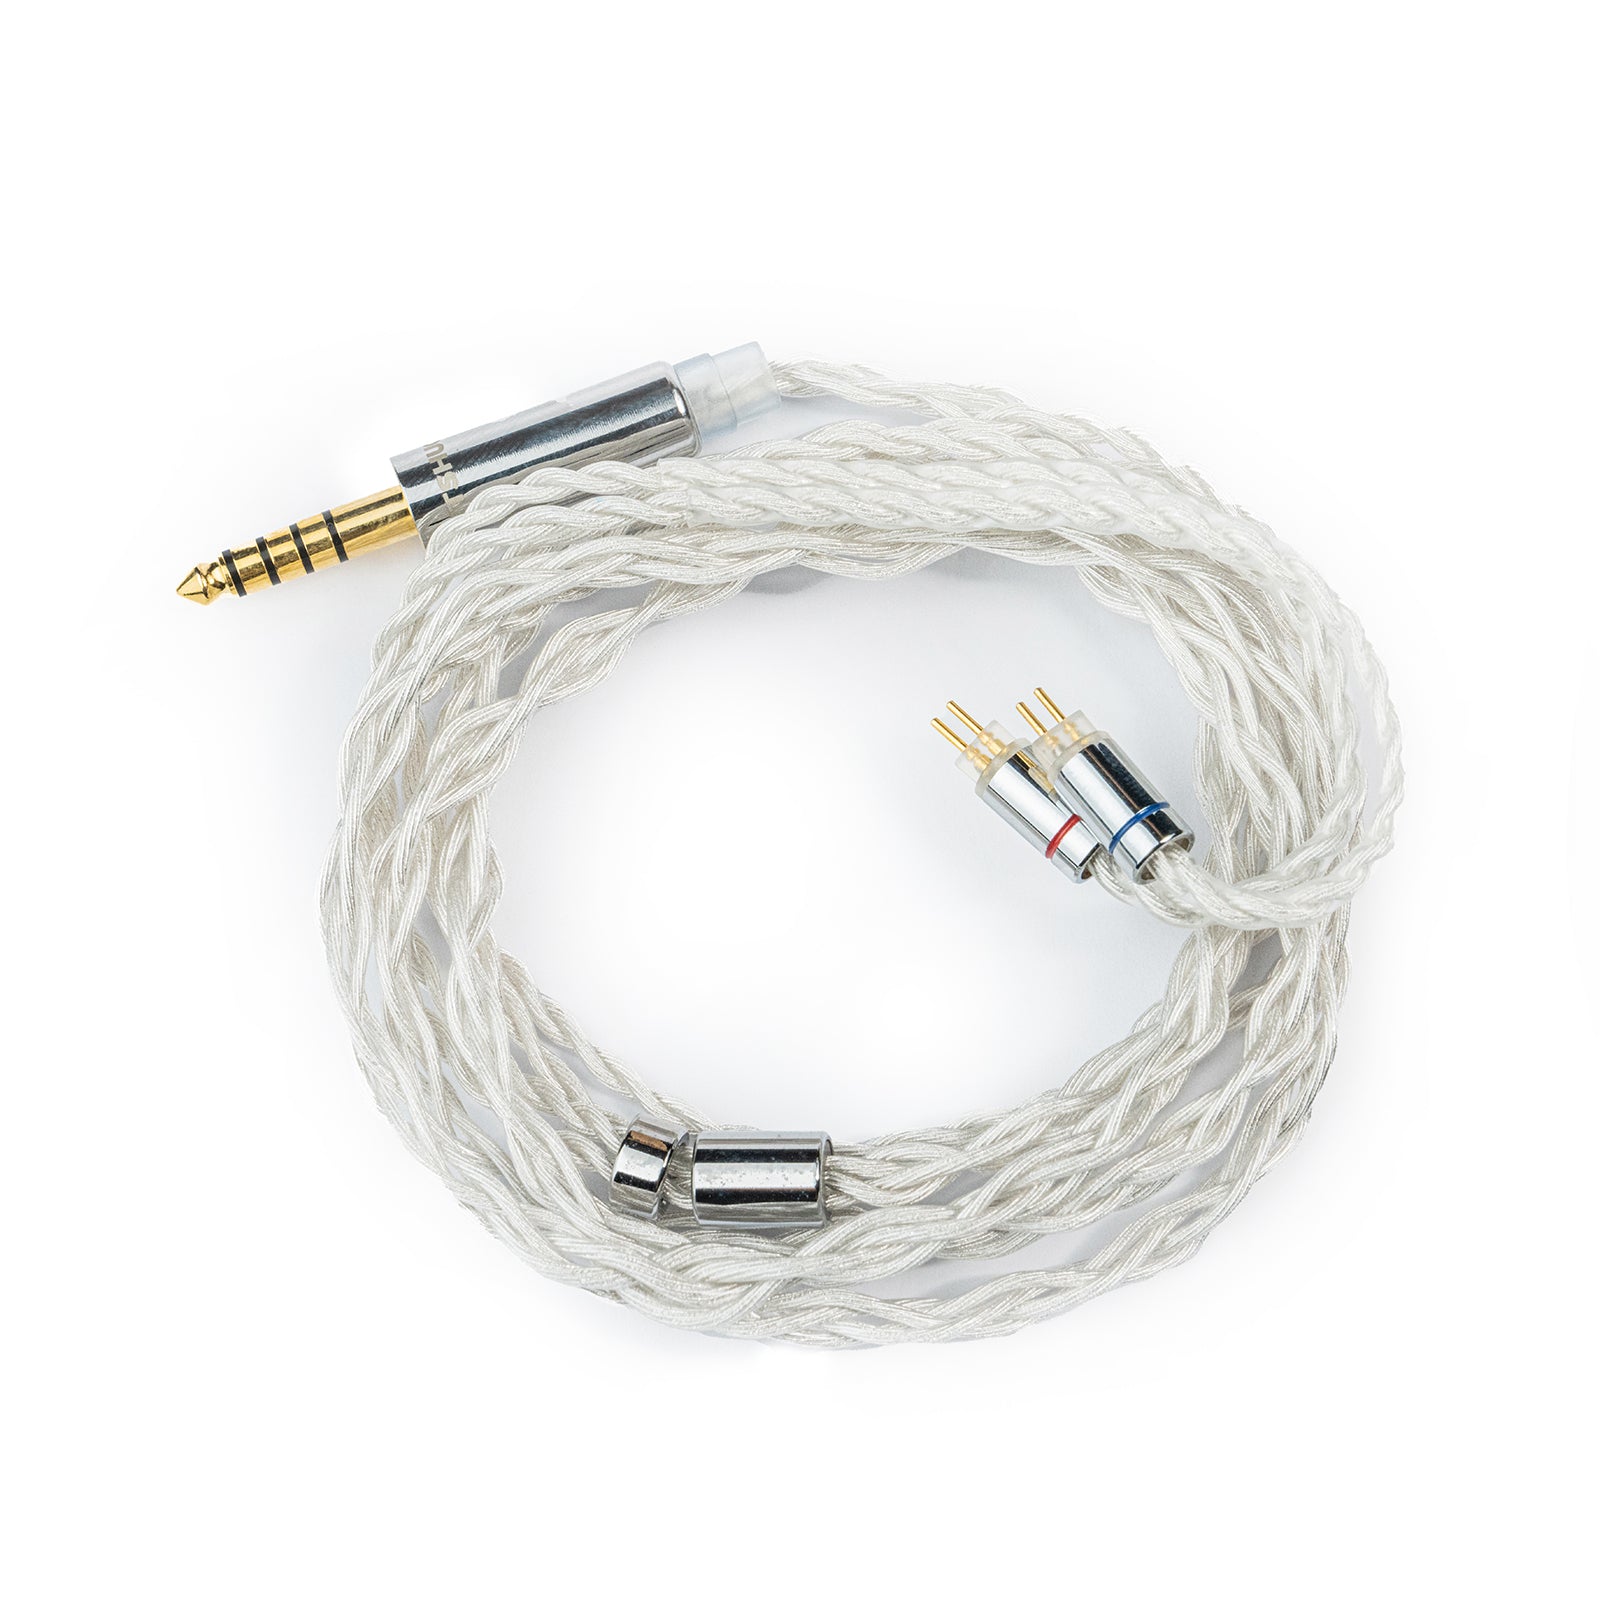 LETSHUOER M11 3.5mm single & 4.4mm balance with 2 pin 392-strands silver-plated copper wire